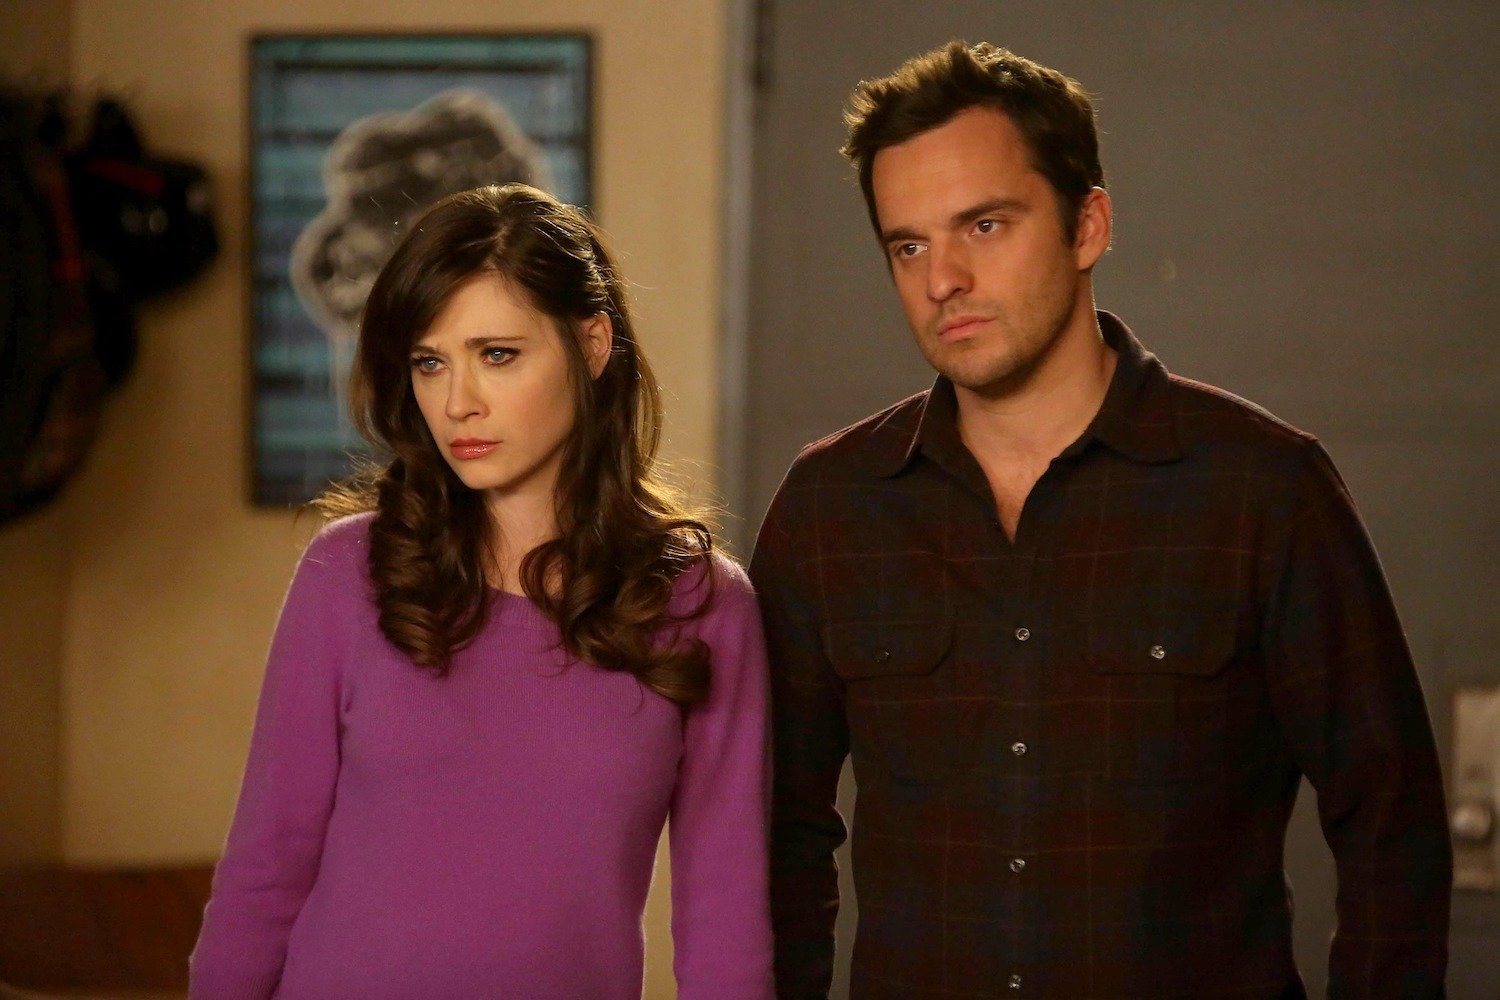 Zooey Deschanel as Jess and Jake Johnson as Nick  on 'New Girl'